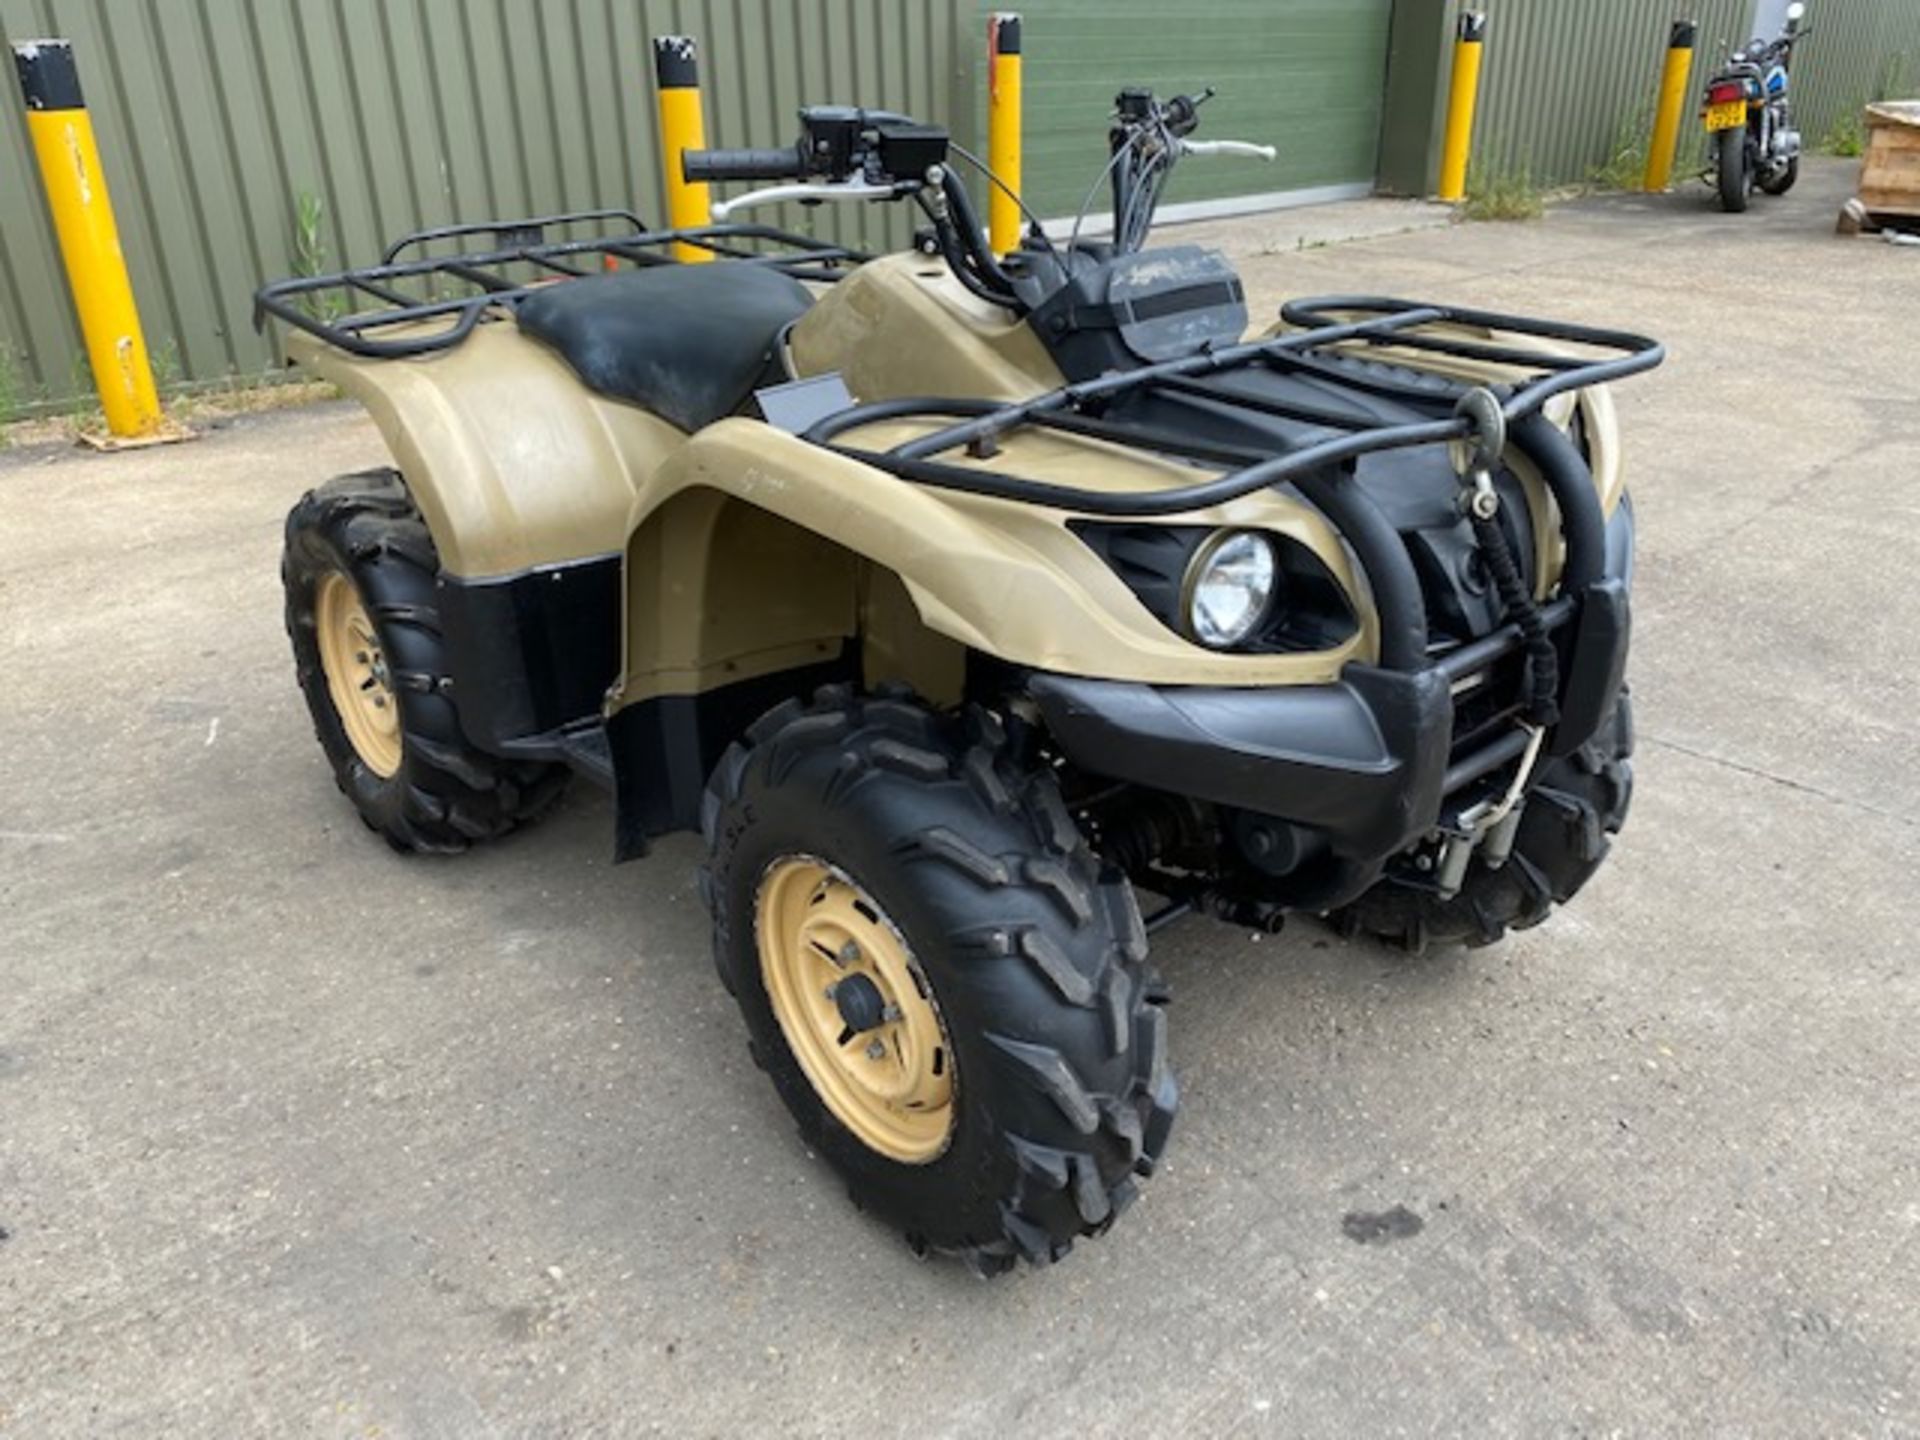 Military Specification Yamaha Grizzly 450 4 x 4 ATV Quad Bike ONLY 5,539Km!!! - Image 4 of 26